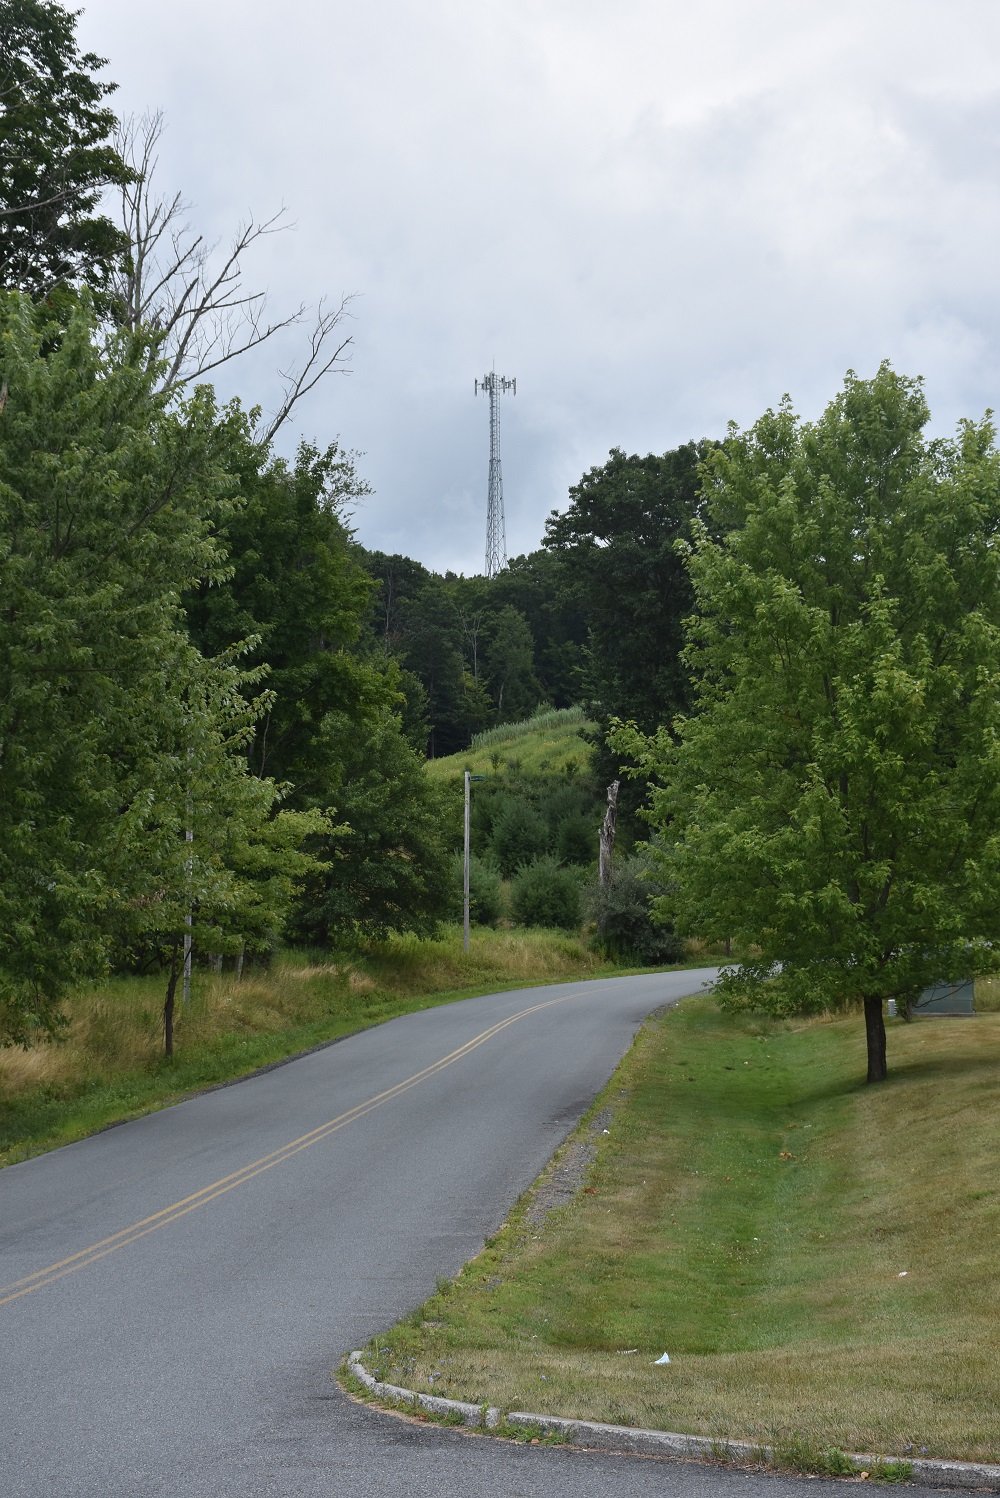 Contributed photo
This cell tower in Rock Hill, built on property acquired from the Emerald Corporate Center, now provides a public cell signal to a previously underserved area.